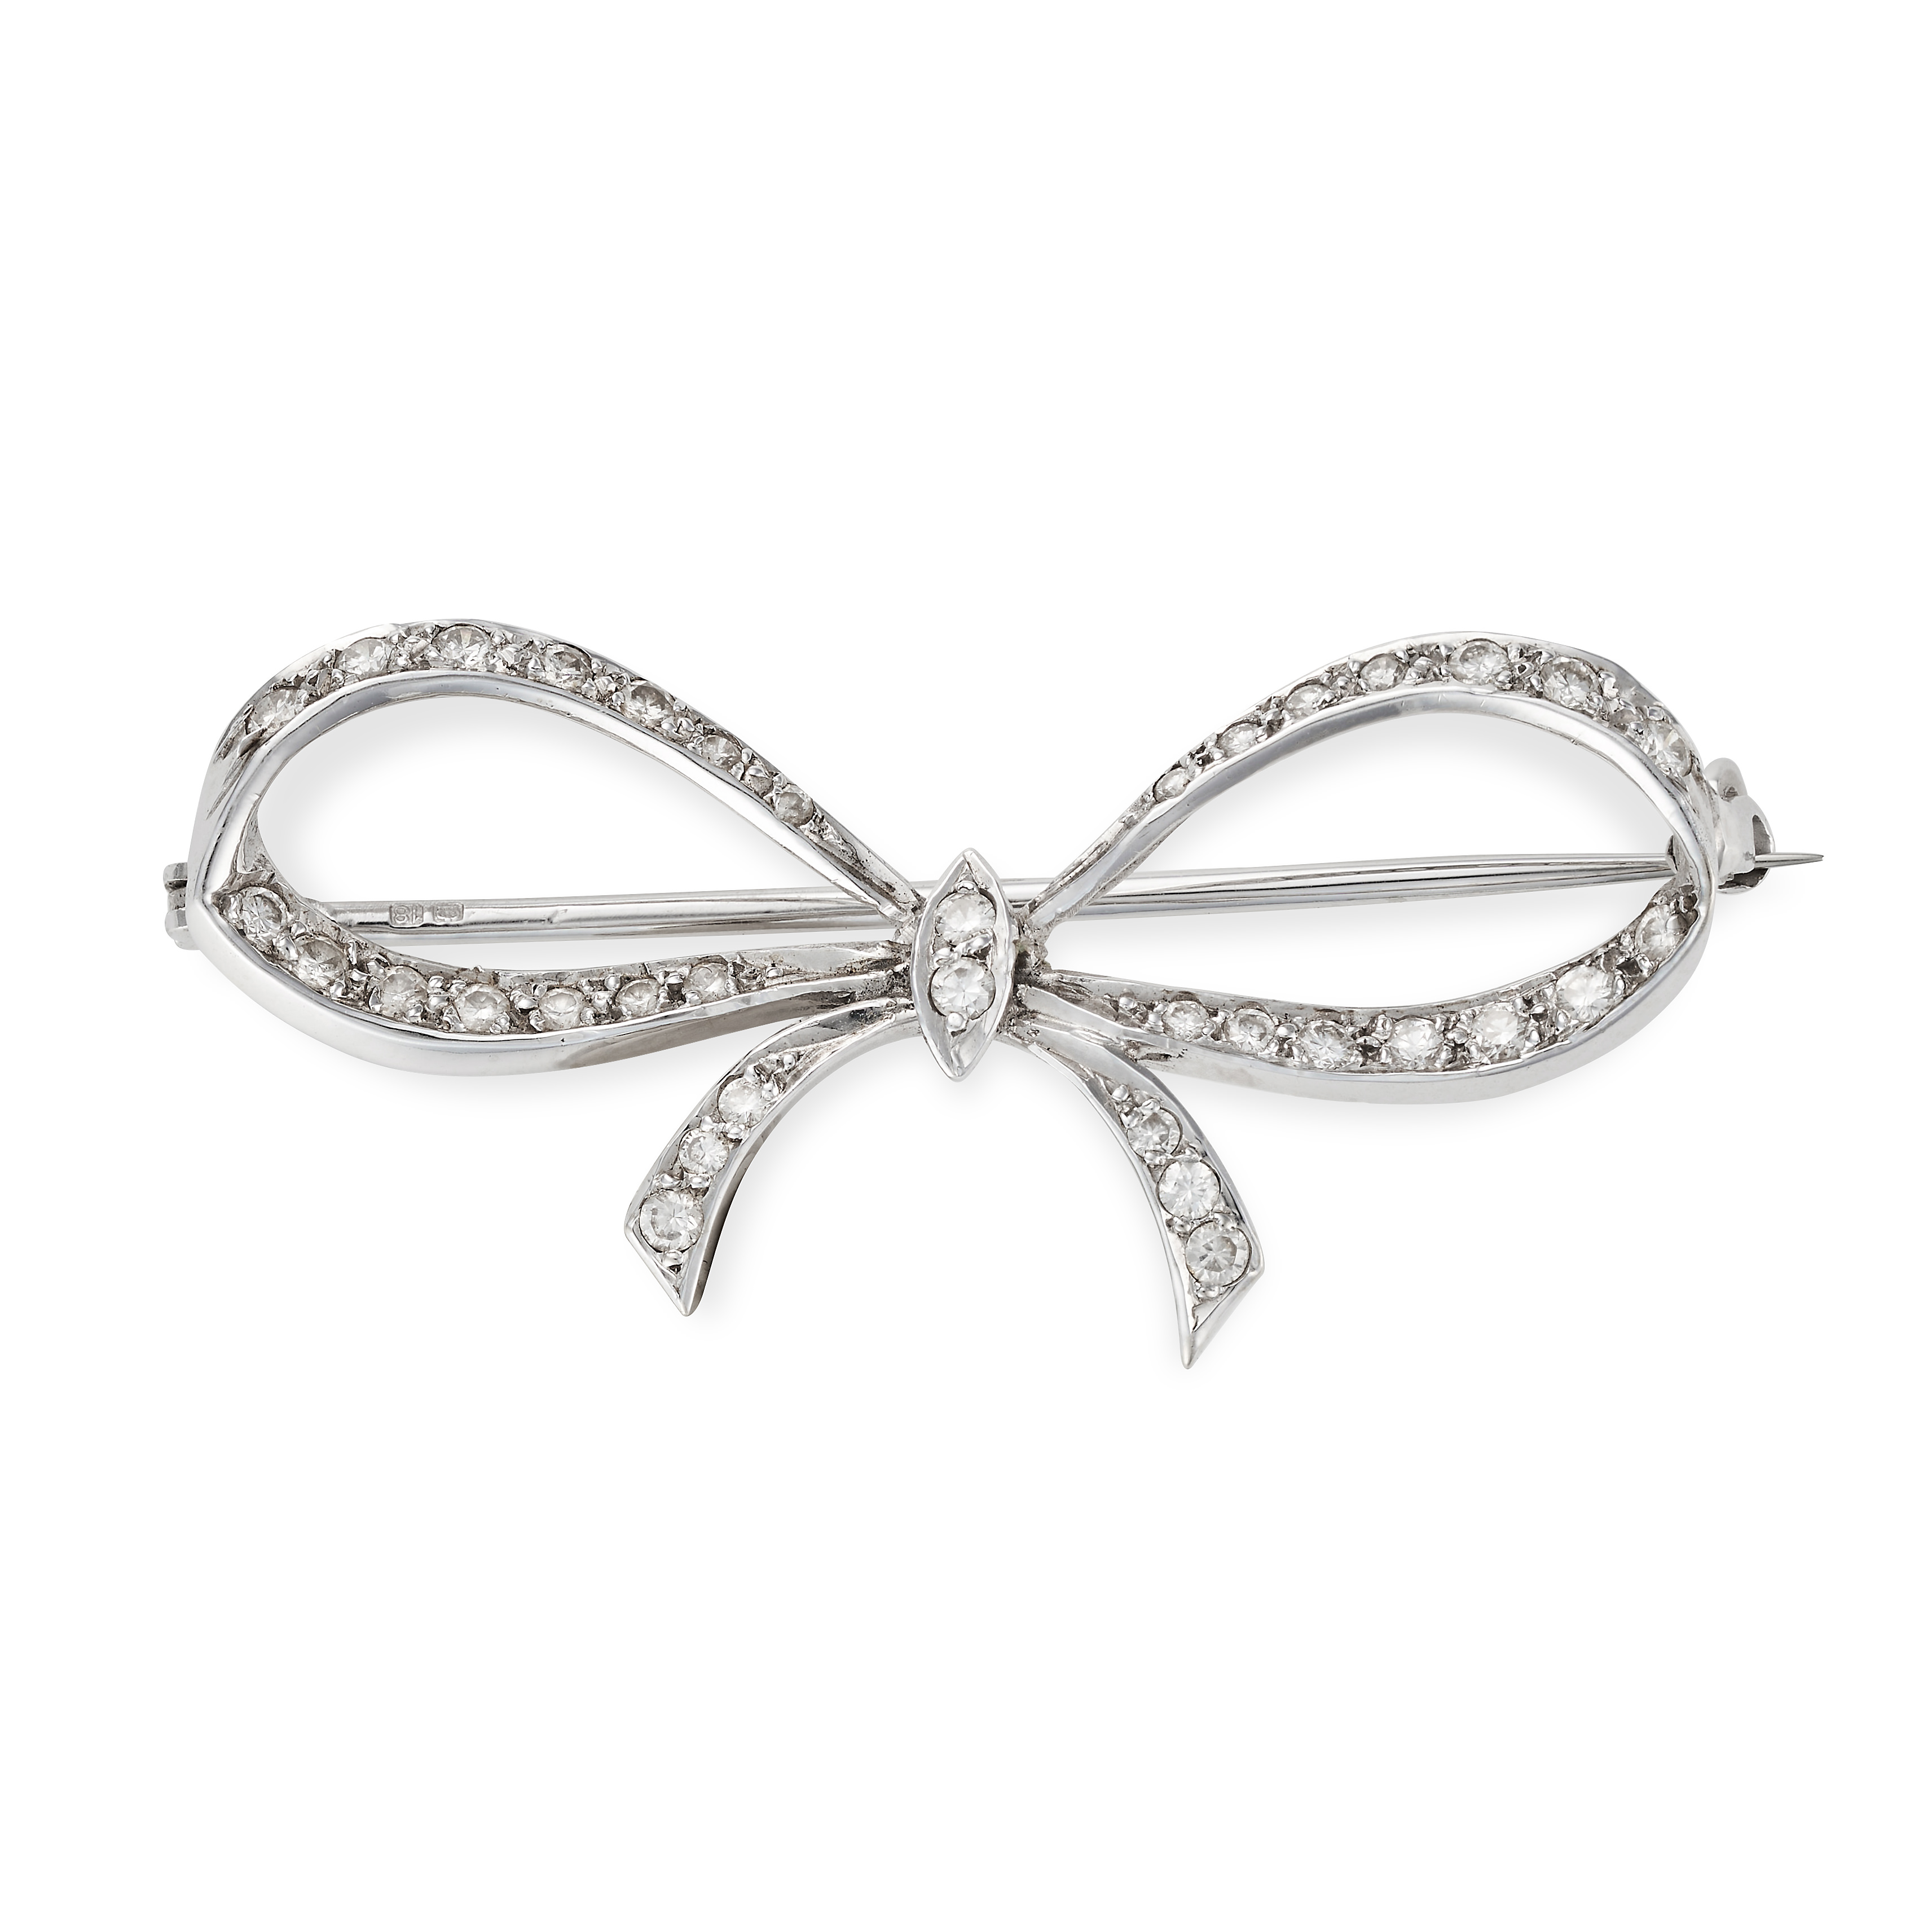 A VINTAGE DIAMOND BOW BROOCH in 18ct white gold, designed as a bow set throughout with round bril...